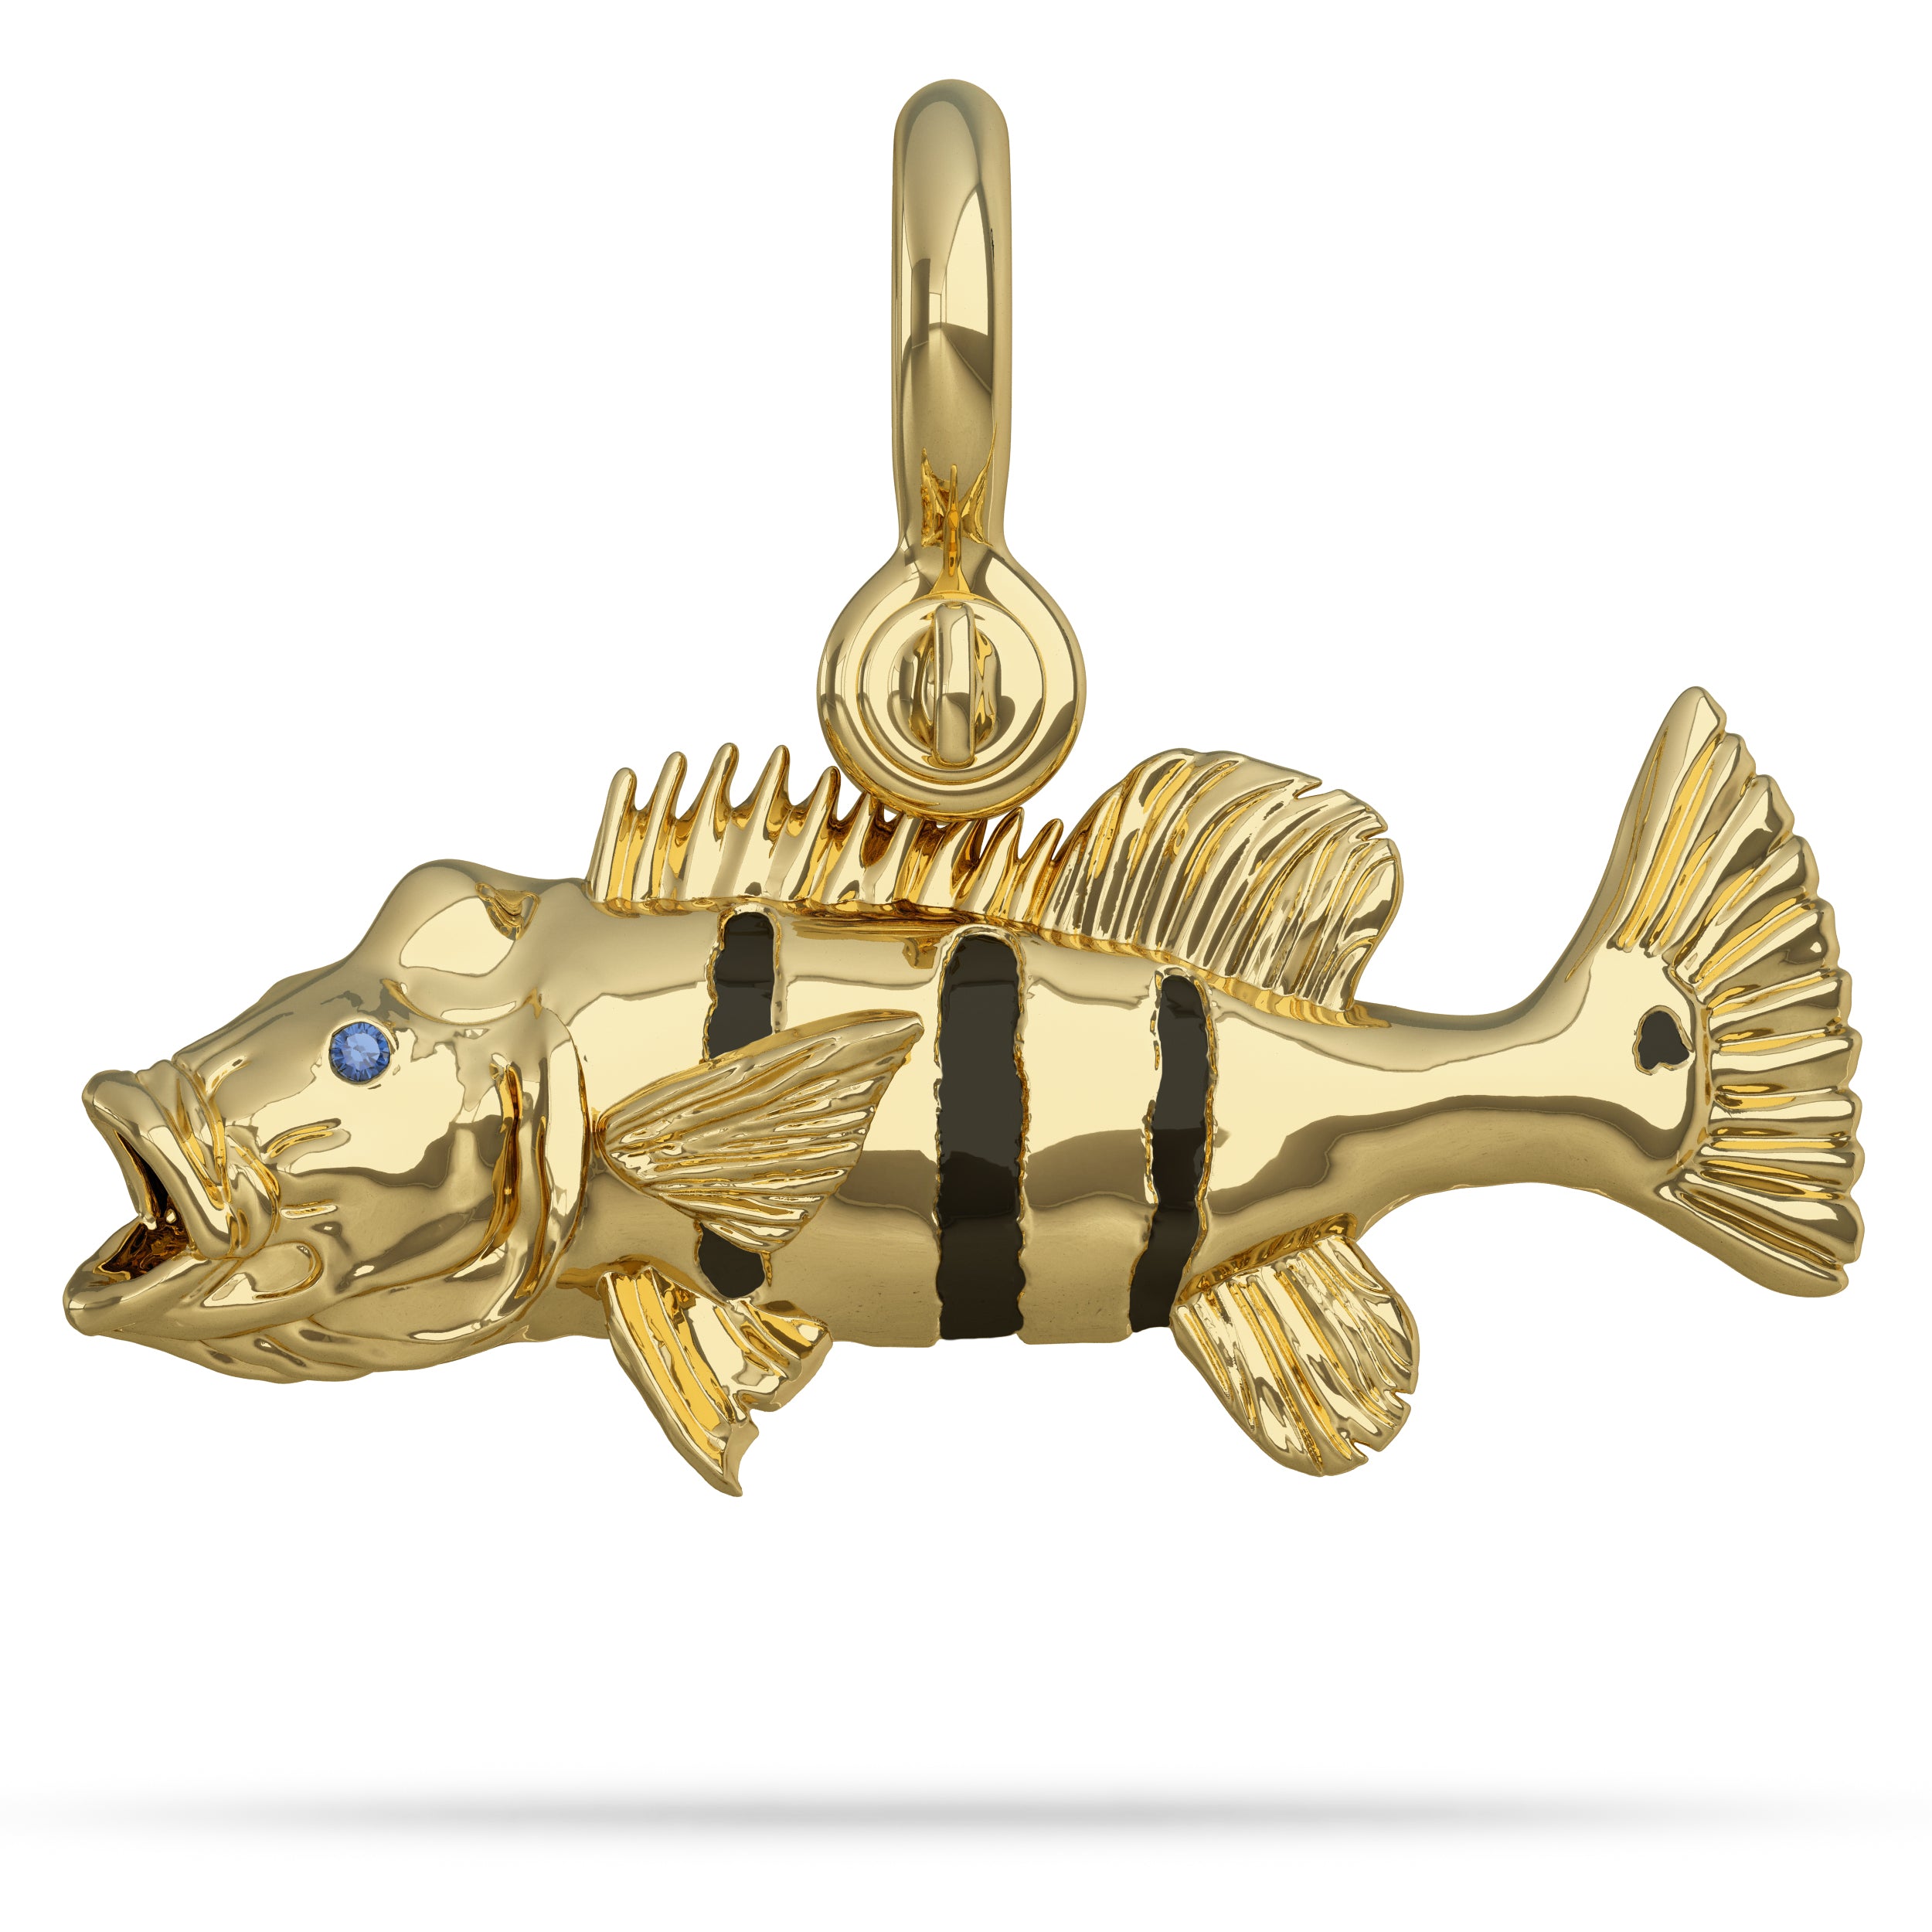 Solid 14k Gold Peacock Bass Pendant High Polished Mirror Finish With Blue Sapphire Eye And A Mariner Shackle Bail Custom Designed By Nautical Treasure Jewelry In The Florida Keys 